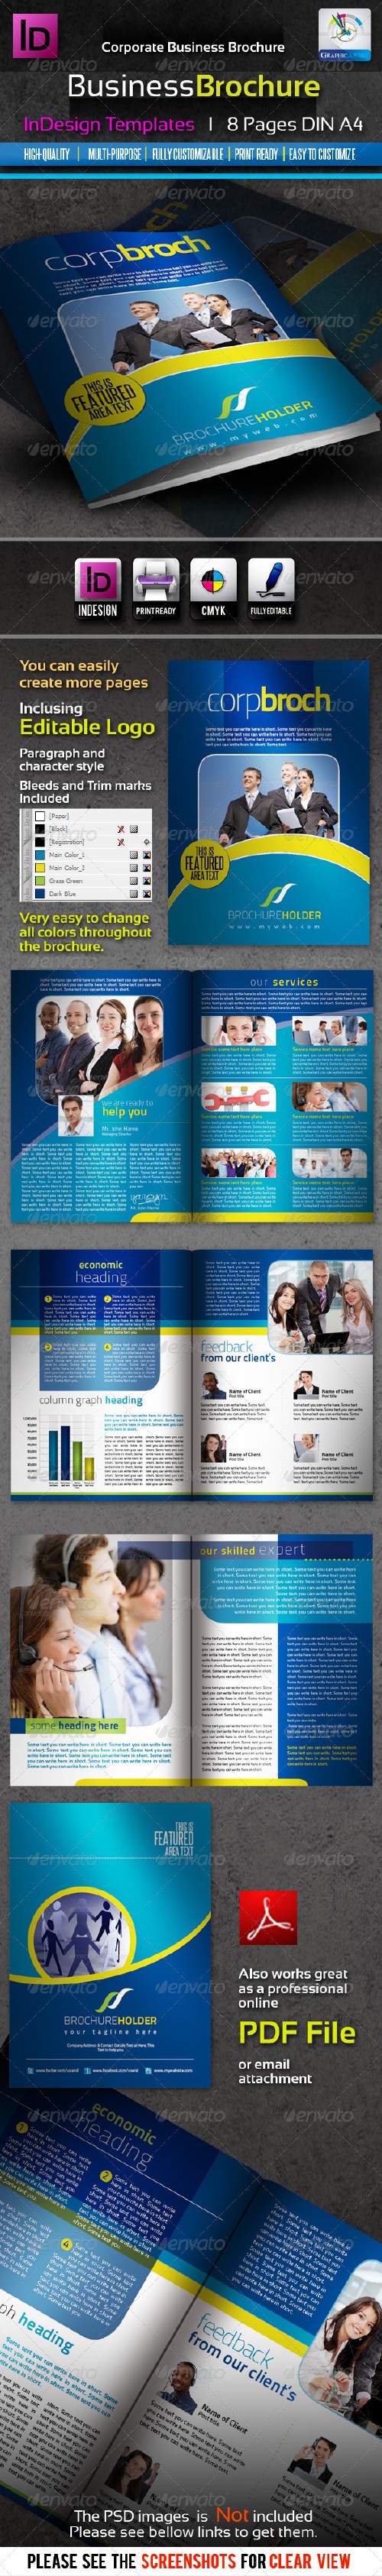 GraphicRiver Corporate Business InDesign Brochure 8pages 1911081